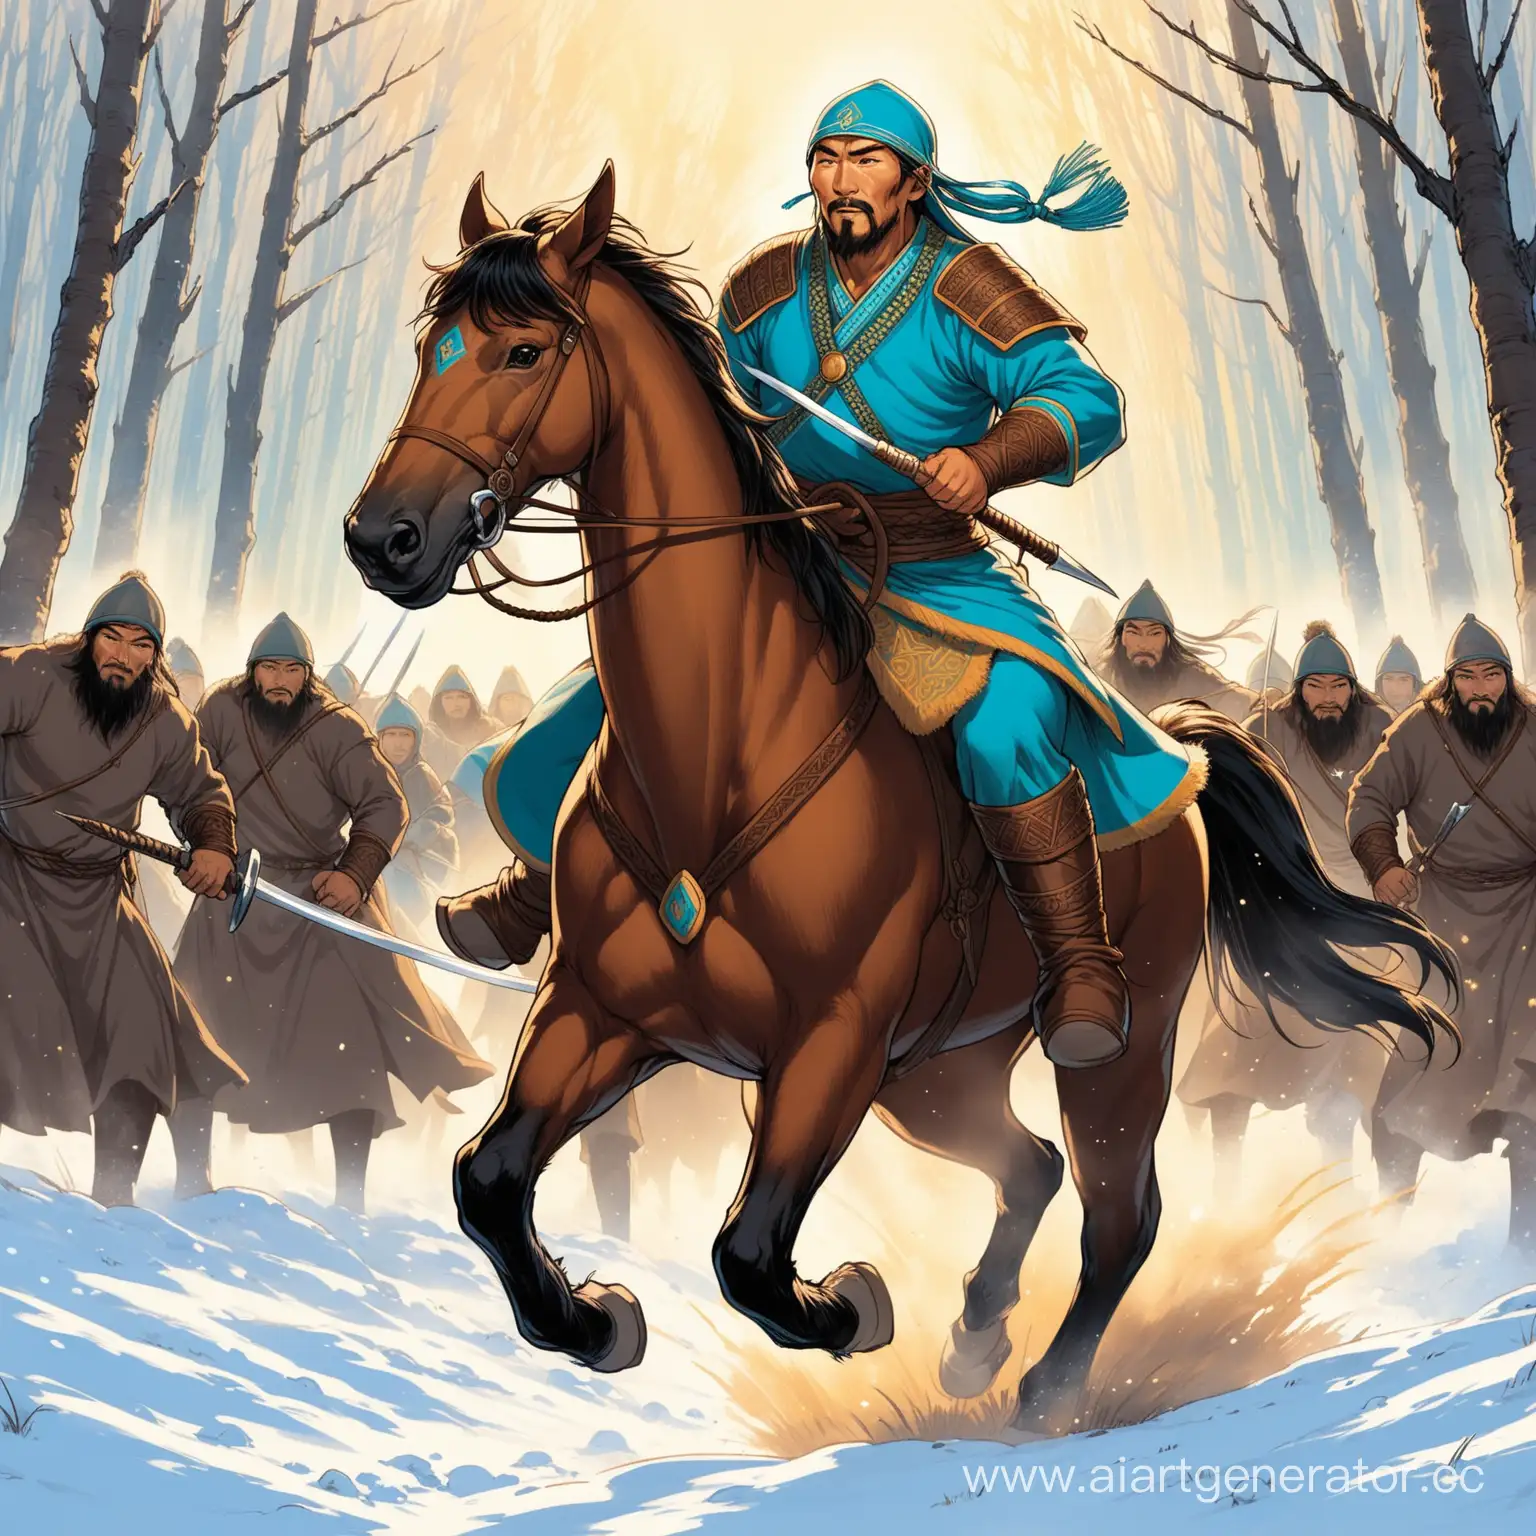 Ertostik , a legendary Kazakh warrior,  bravely fought against his enemies  in the Kazakh steppes in ancient times. He used his strength and superpower  to win his opponents. One day, Ertostik was with his horse in the forest when he came across a group of bandits. The bandits attacked Ertostik, but he was too strong and big for them. He fought them off and continued on his way.  Ertostik became a hero to the Kazakh people. He is famous for his great spirit, power and intelligence. His story is still told today, and he is popular in Kazakh folklore these days.